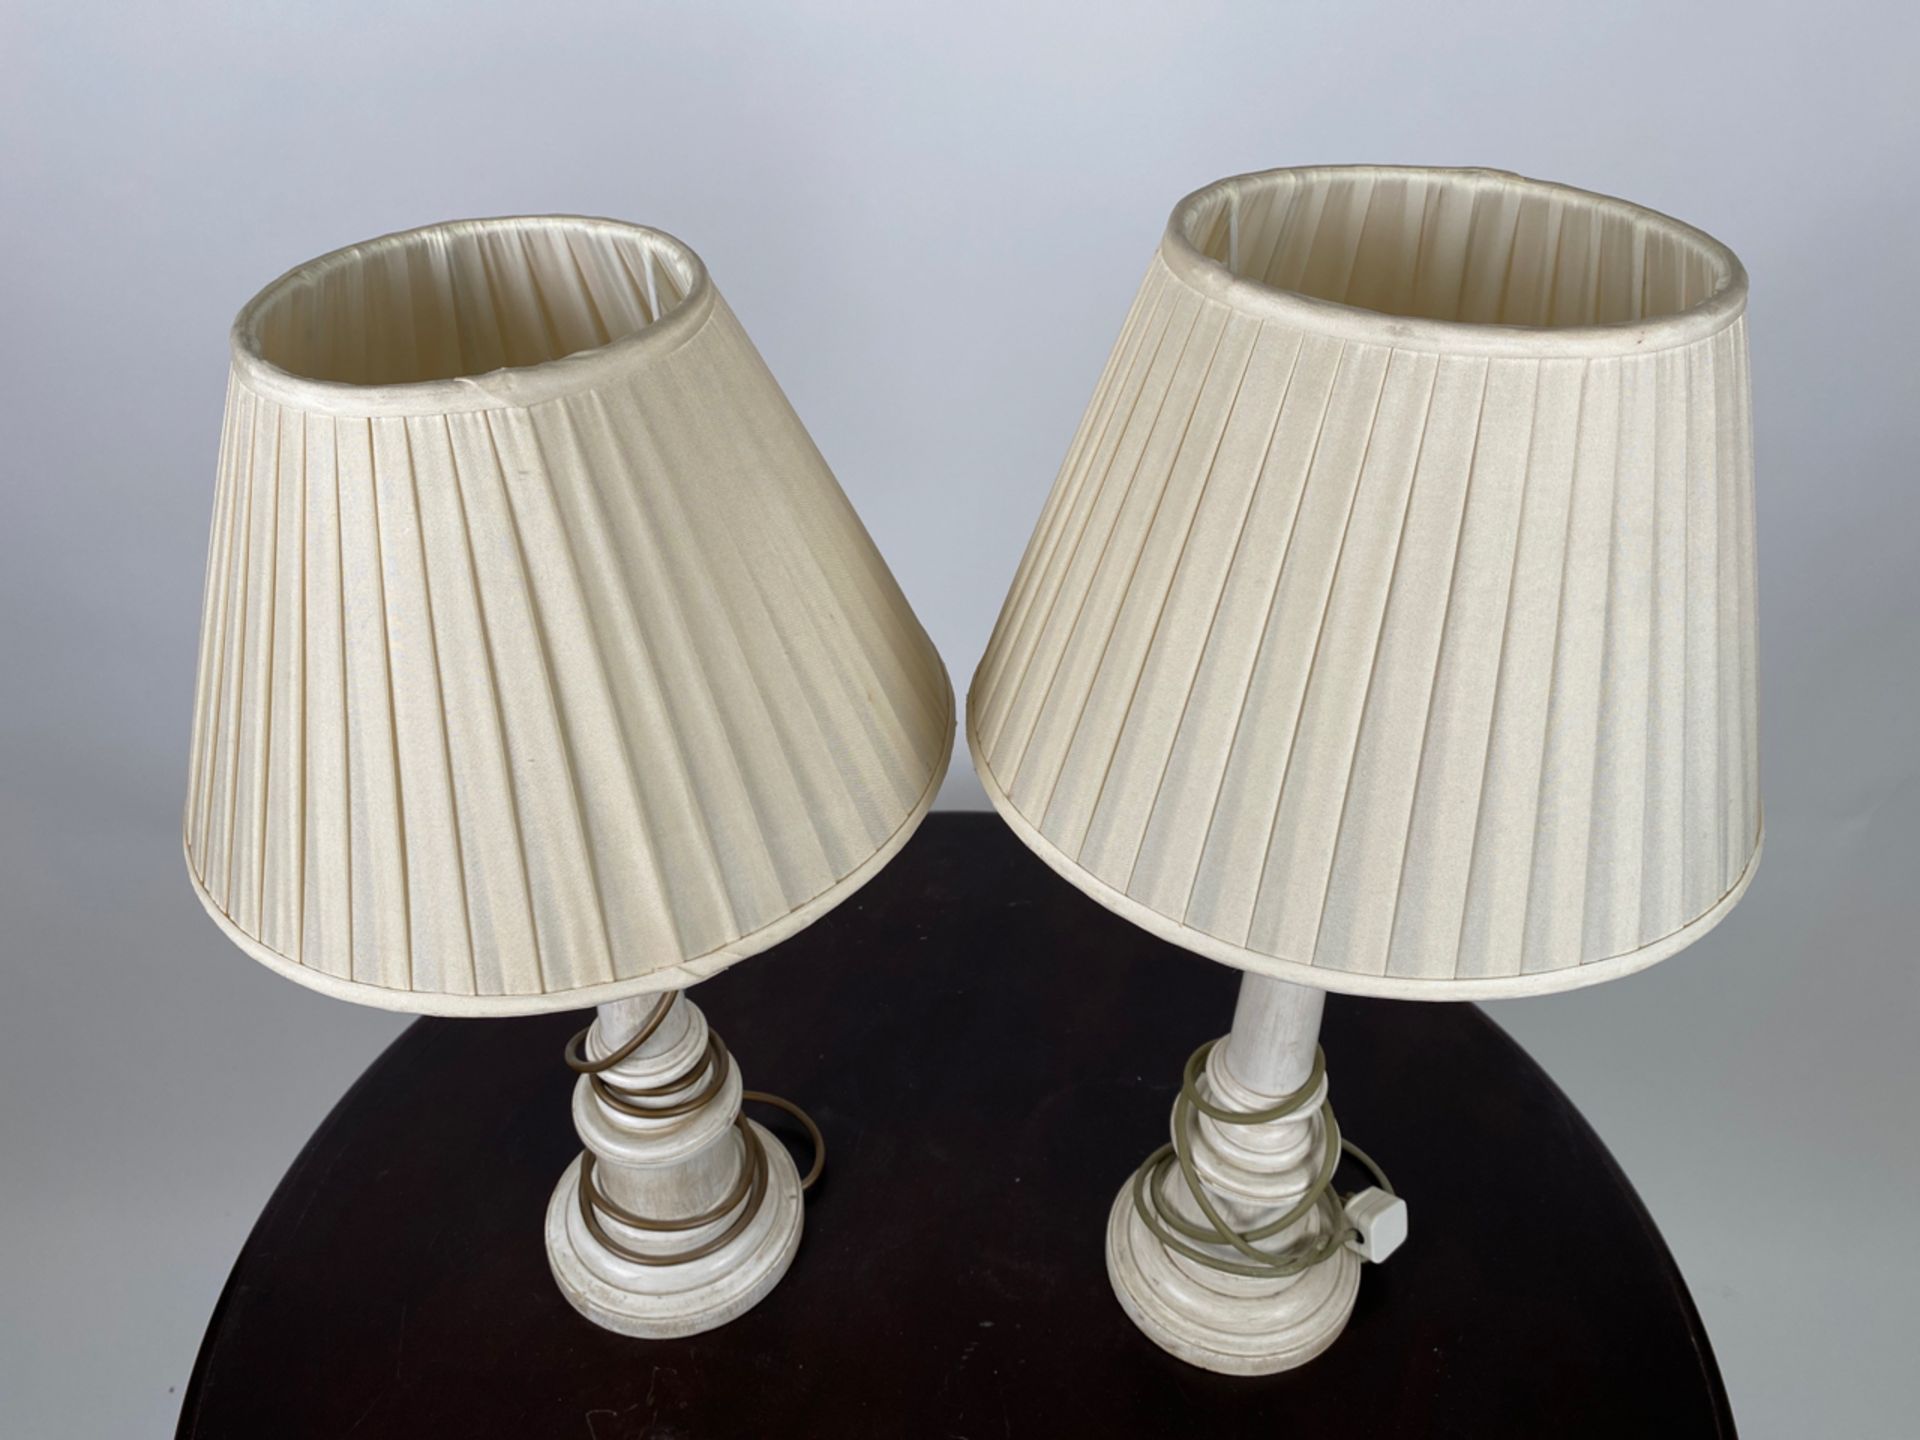 Pair of Wooden Table Lamps - Image 2 of 3